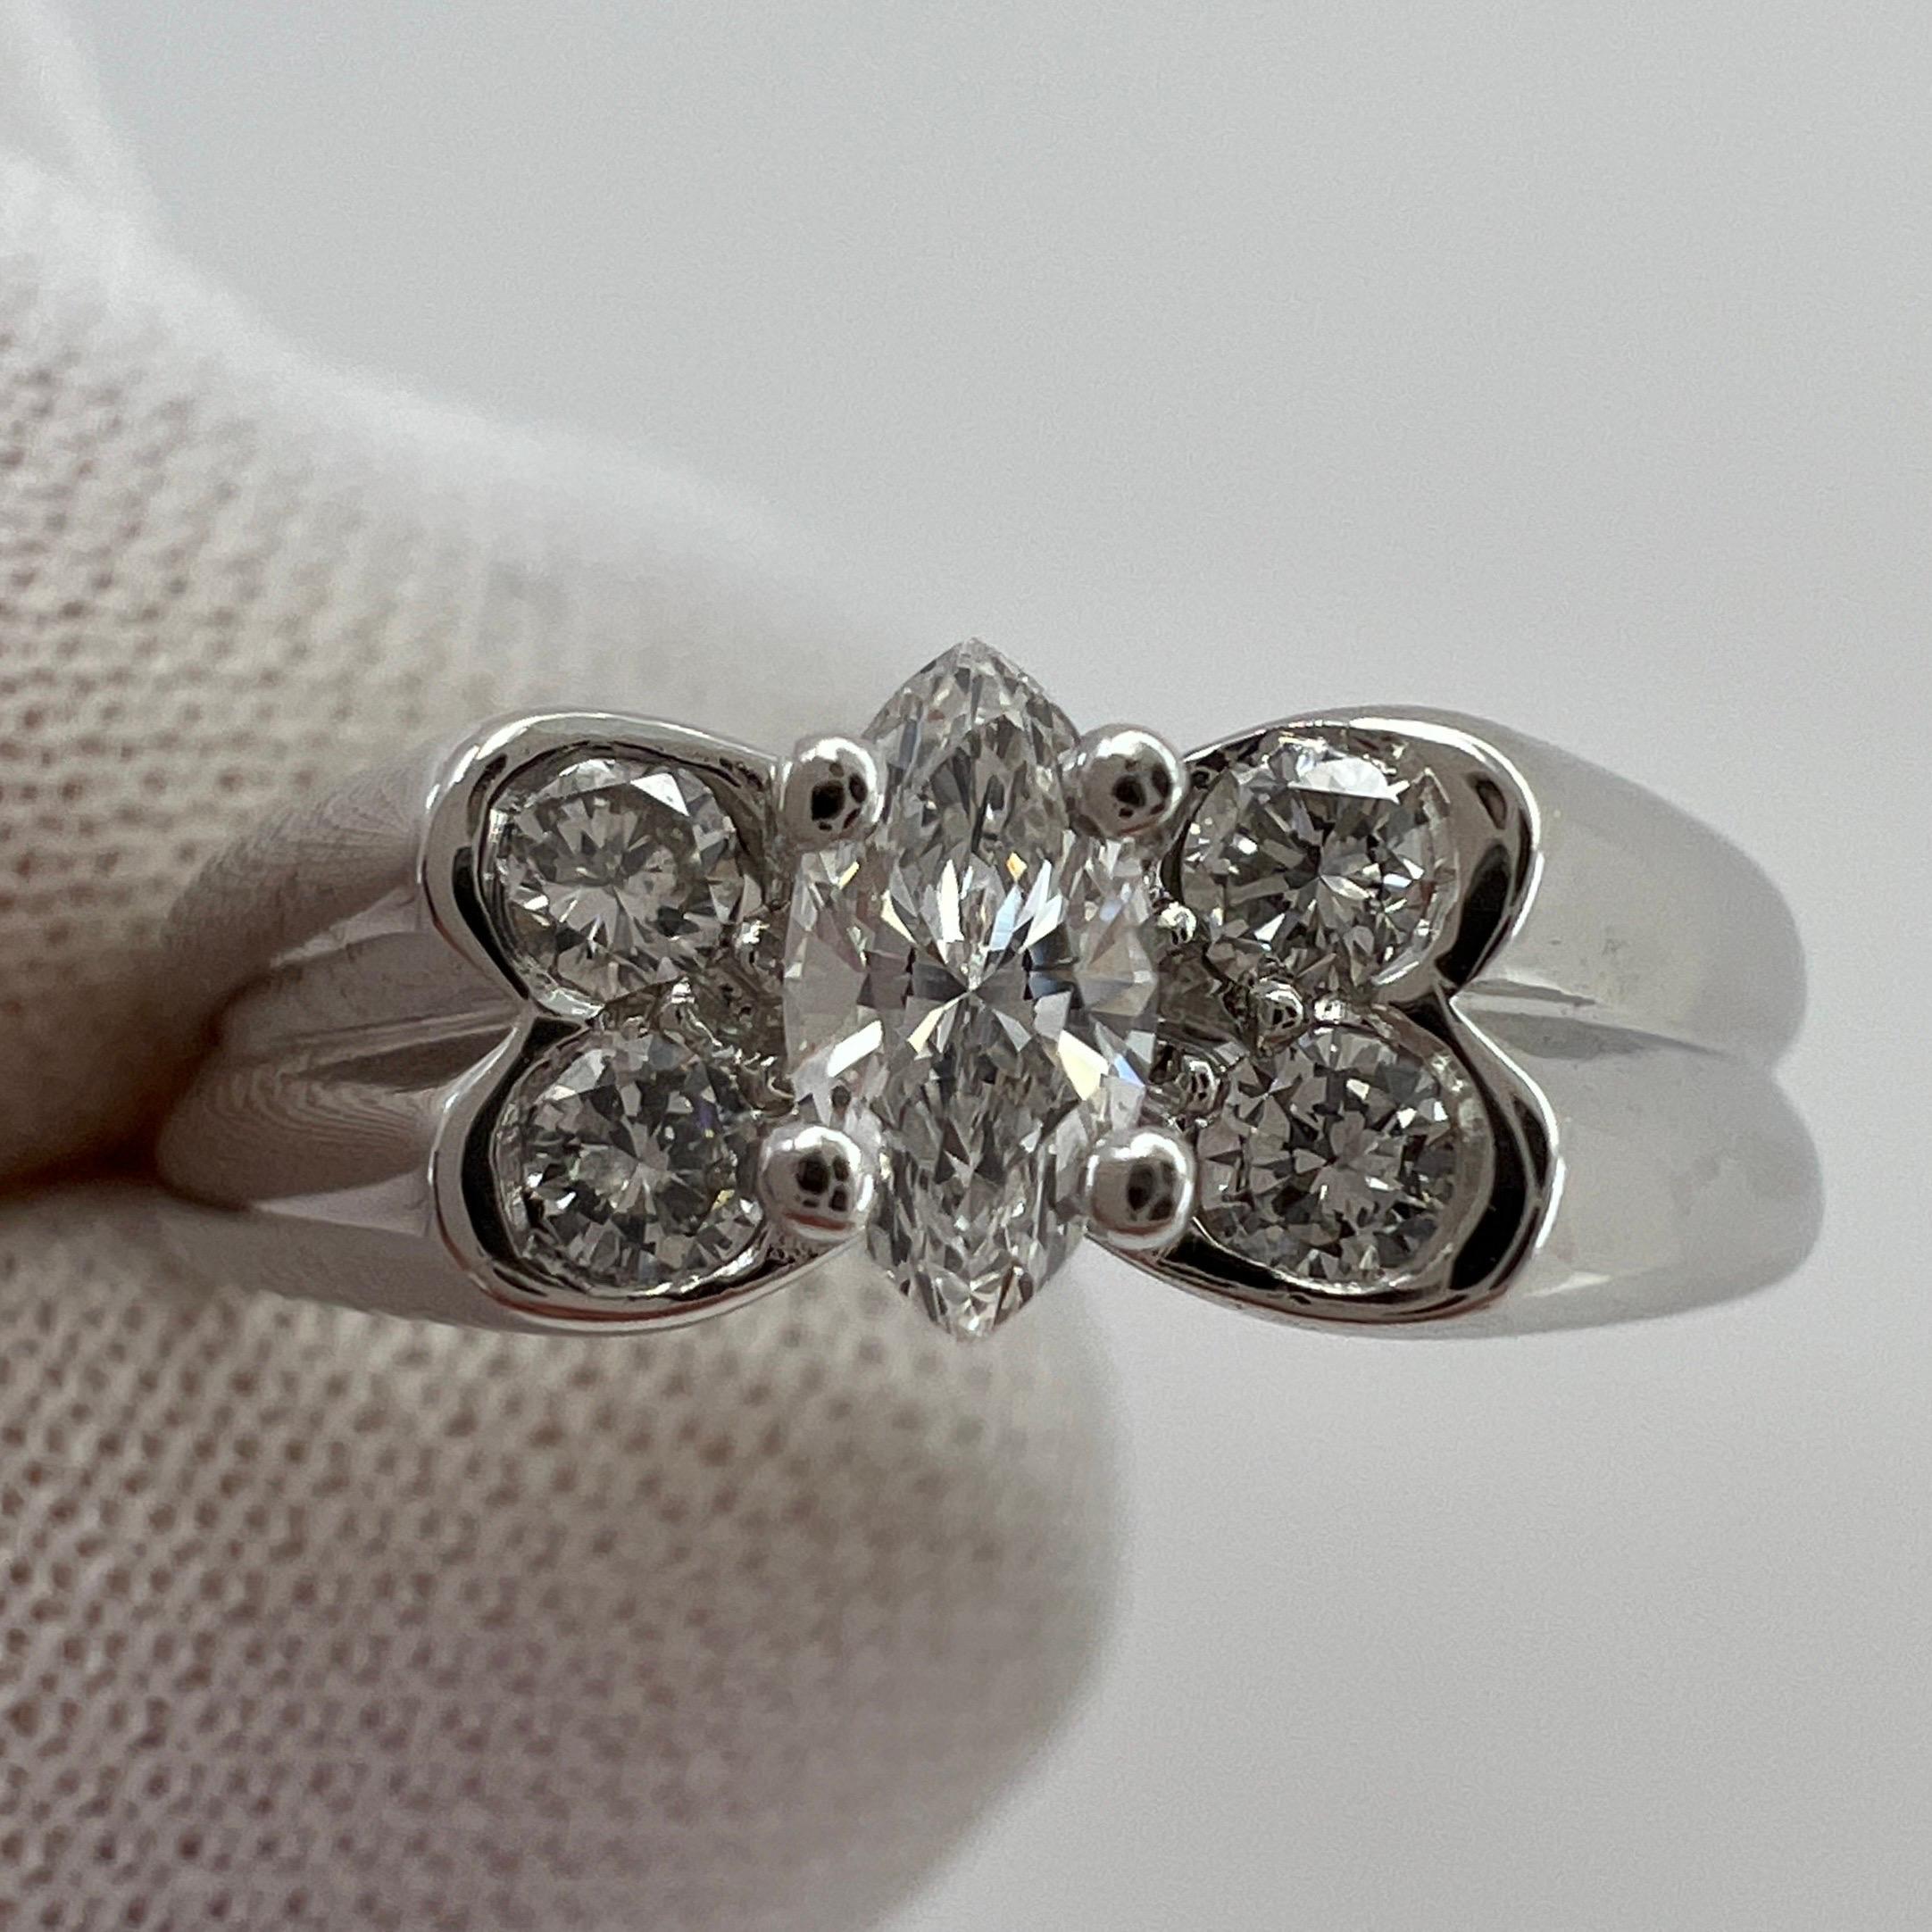 Vintage Van Cleef & Arpels Diamond 18k White Gold Ring.

A stunning vintage ring with a unique design typical of Van Cleef & Arpels, set with approx. 0.50ct of fine quality white diamonds. The centre stone being a beautiful marquise/navette cut.